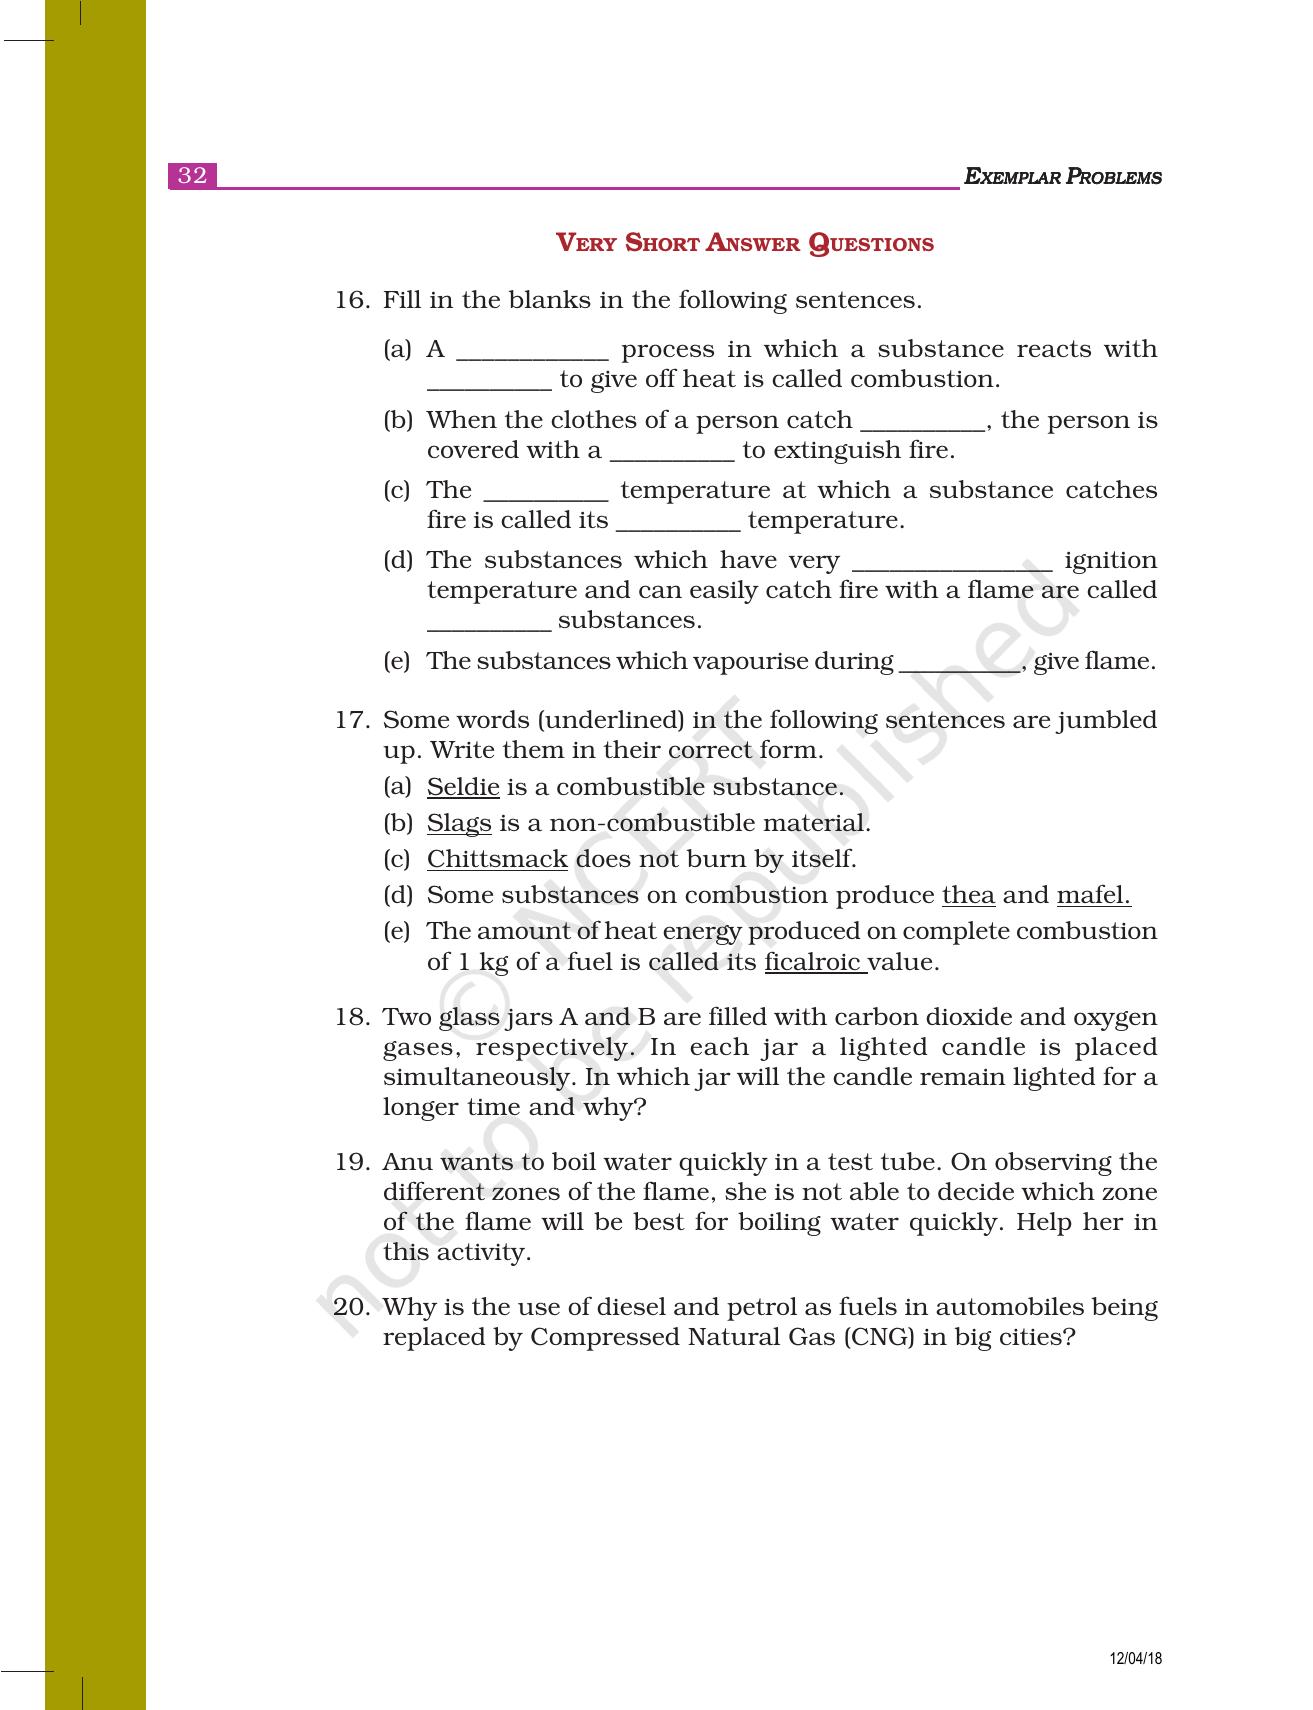 NCERT Exemplar Book for Class 8 Science: Chapter 6- Combustion and Flame - Page 3